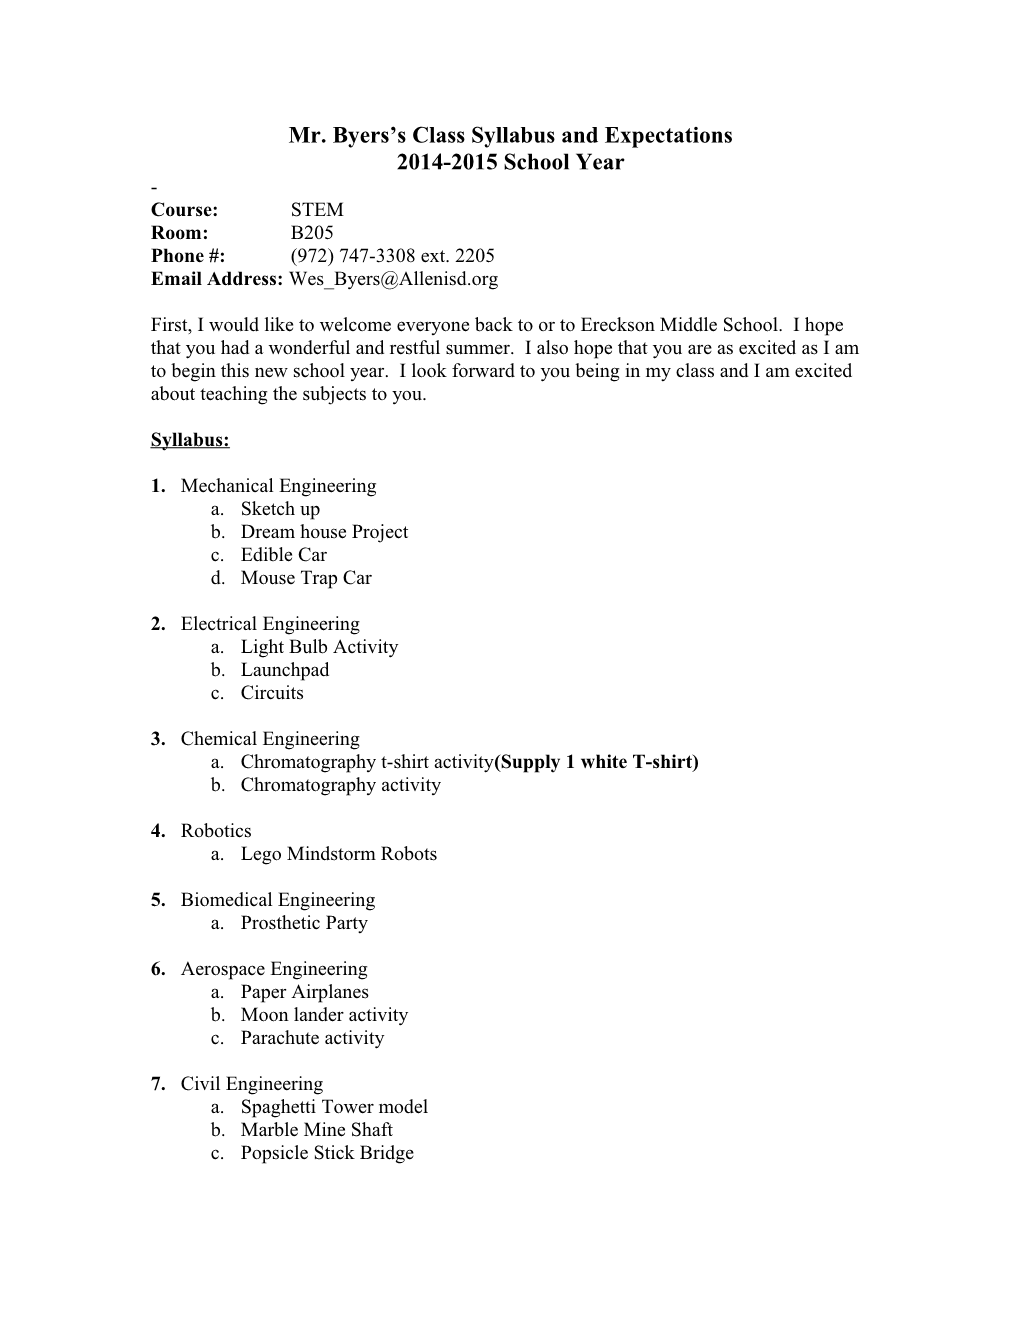 Mr. Byers S Class Syllabus and Expectations